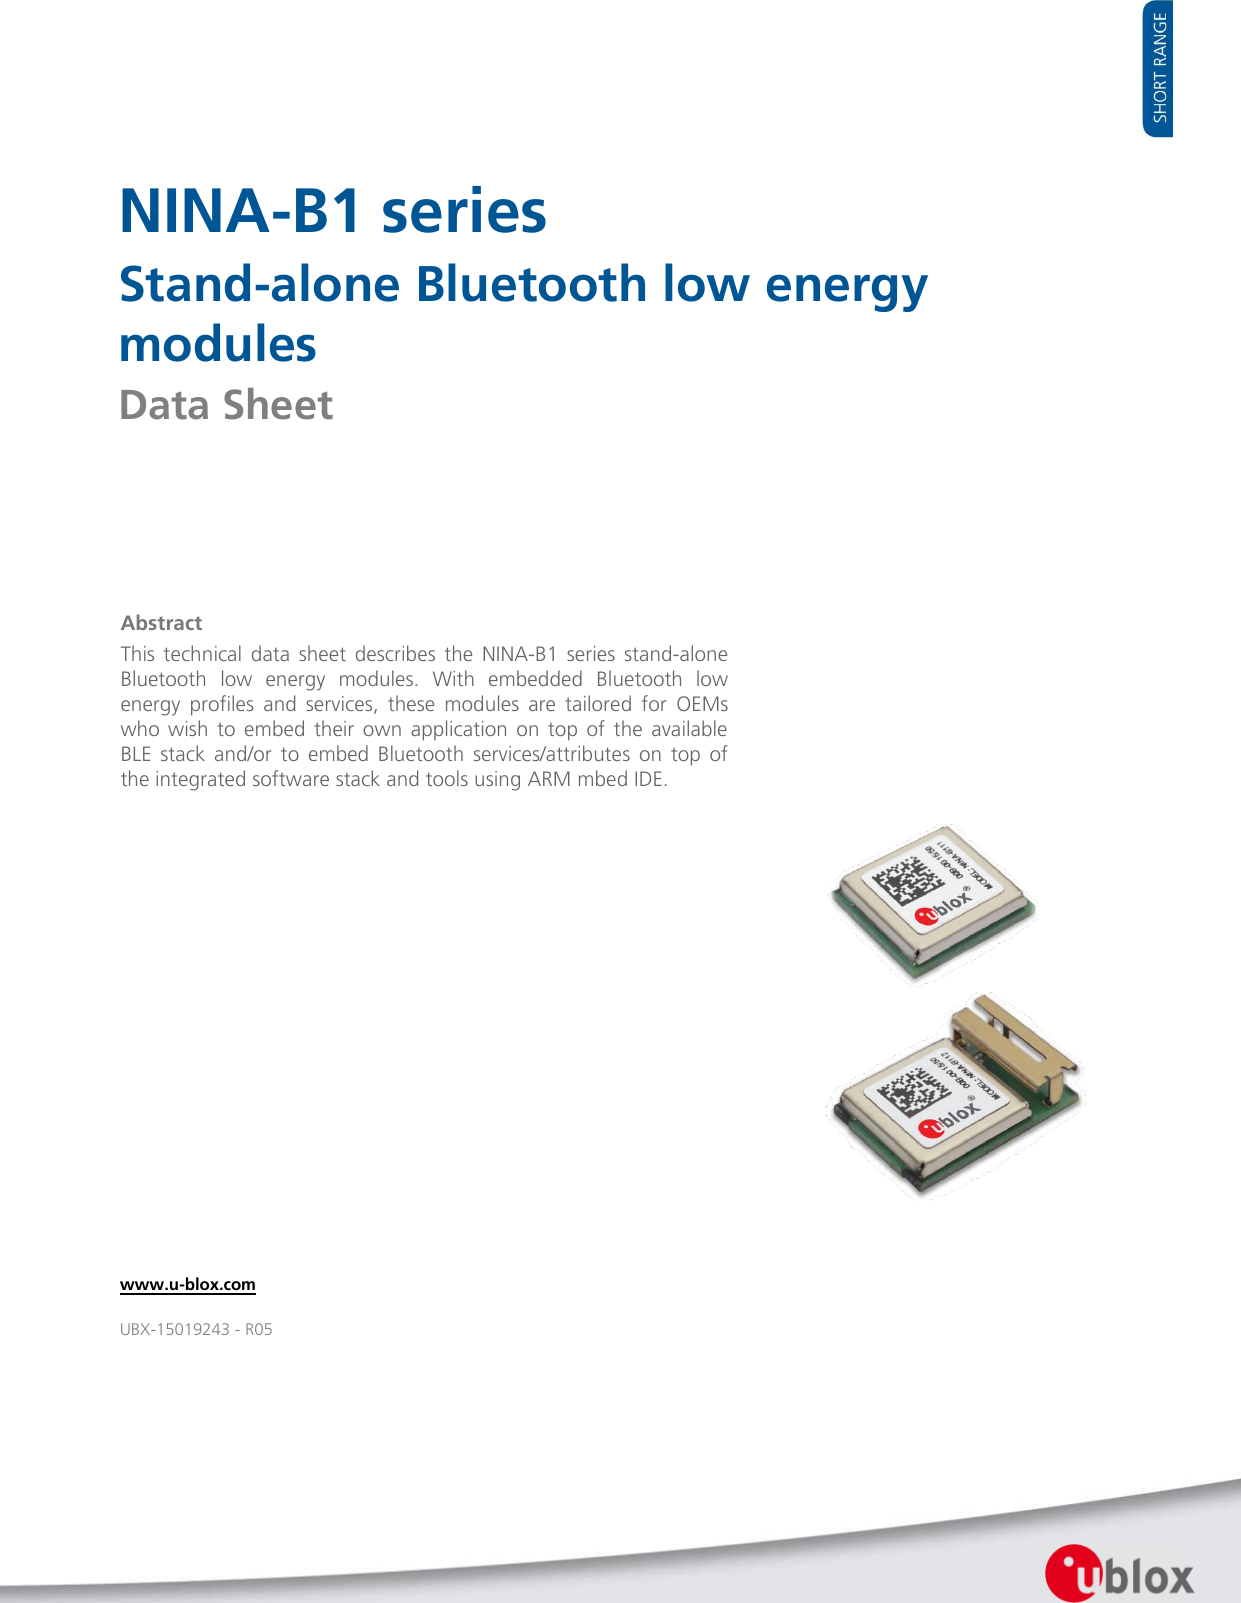    NINA-B1 series Stand-alone Bluetooth low energy modules Data Sheet                   Abstract This  technical  data  sheet  describes  the  NINA-B1  series  stand-alone Bluetooth  low  energy  modules.  With  embedded  Bluetooth  low energy  profiles  and  services,  these  modules  are  tailored  for  OEMs who  wish  to  embed  their  own  application  on  top  of  the  available BLE  stack  and/or  to  embed  Bluetooth  services/attributes  on  top  of the integrated software stack and tools using ARM mbed IDE.    www.u-blox.com UBX-15019243 - R05 